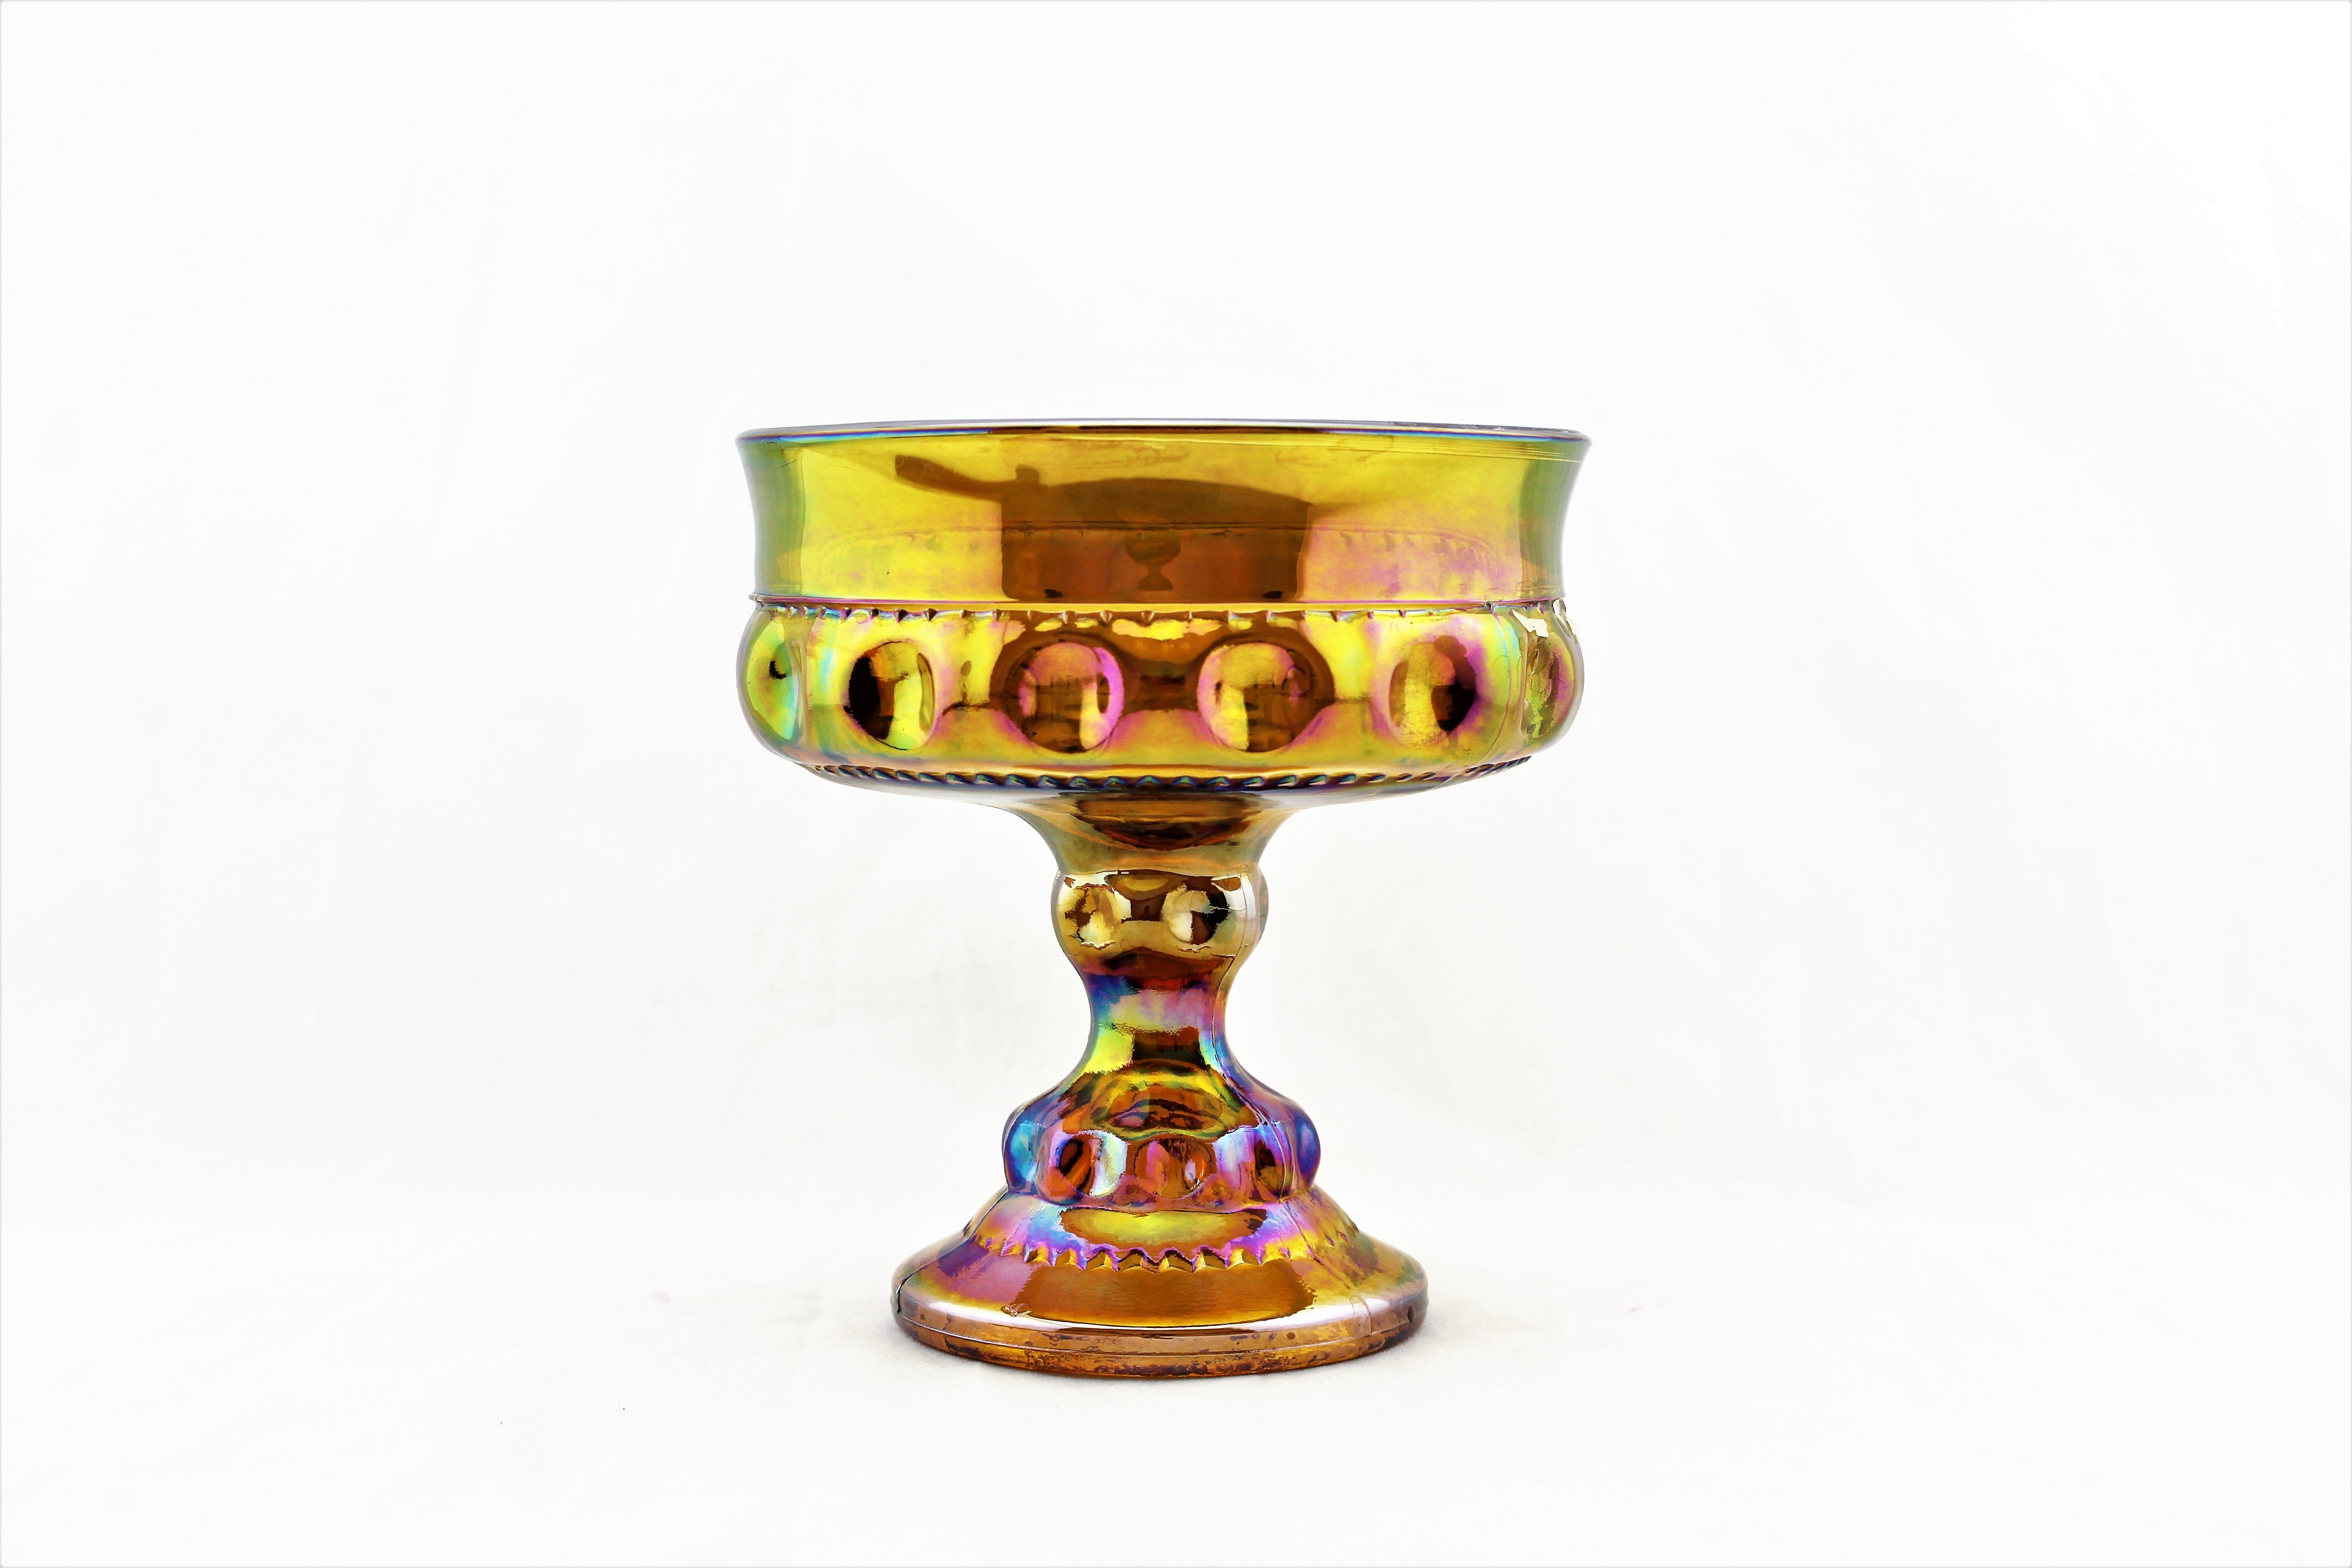 King's Crown Carnival Glass Compote